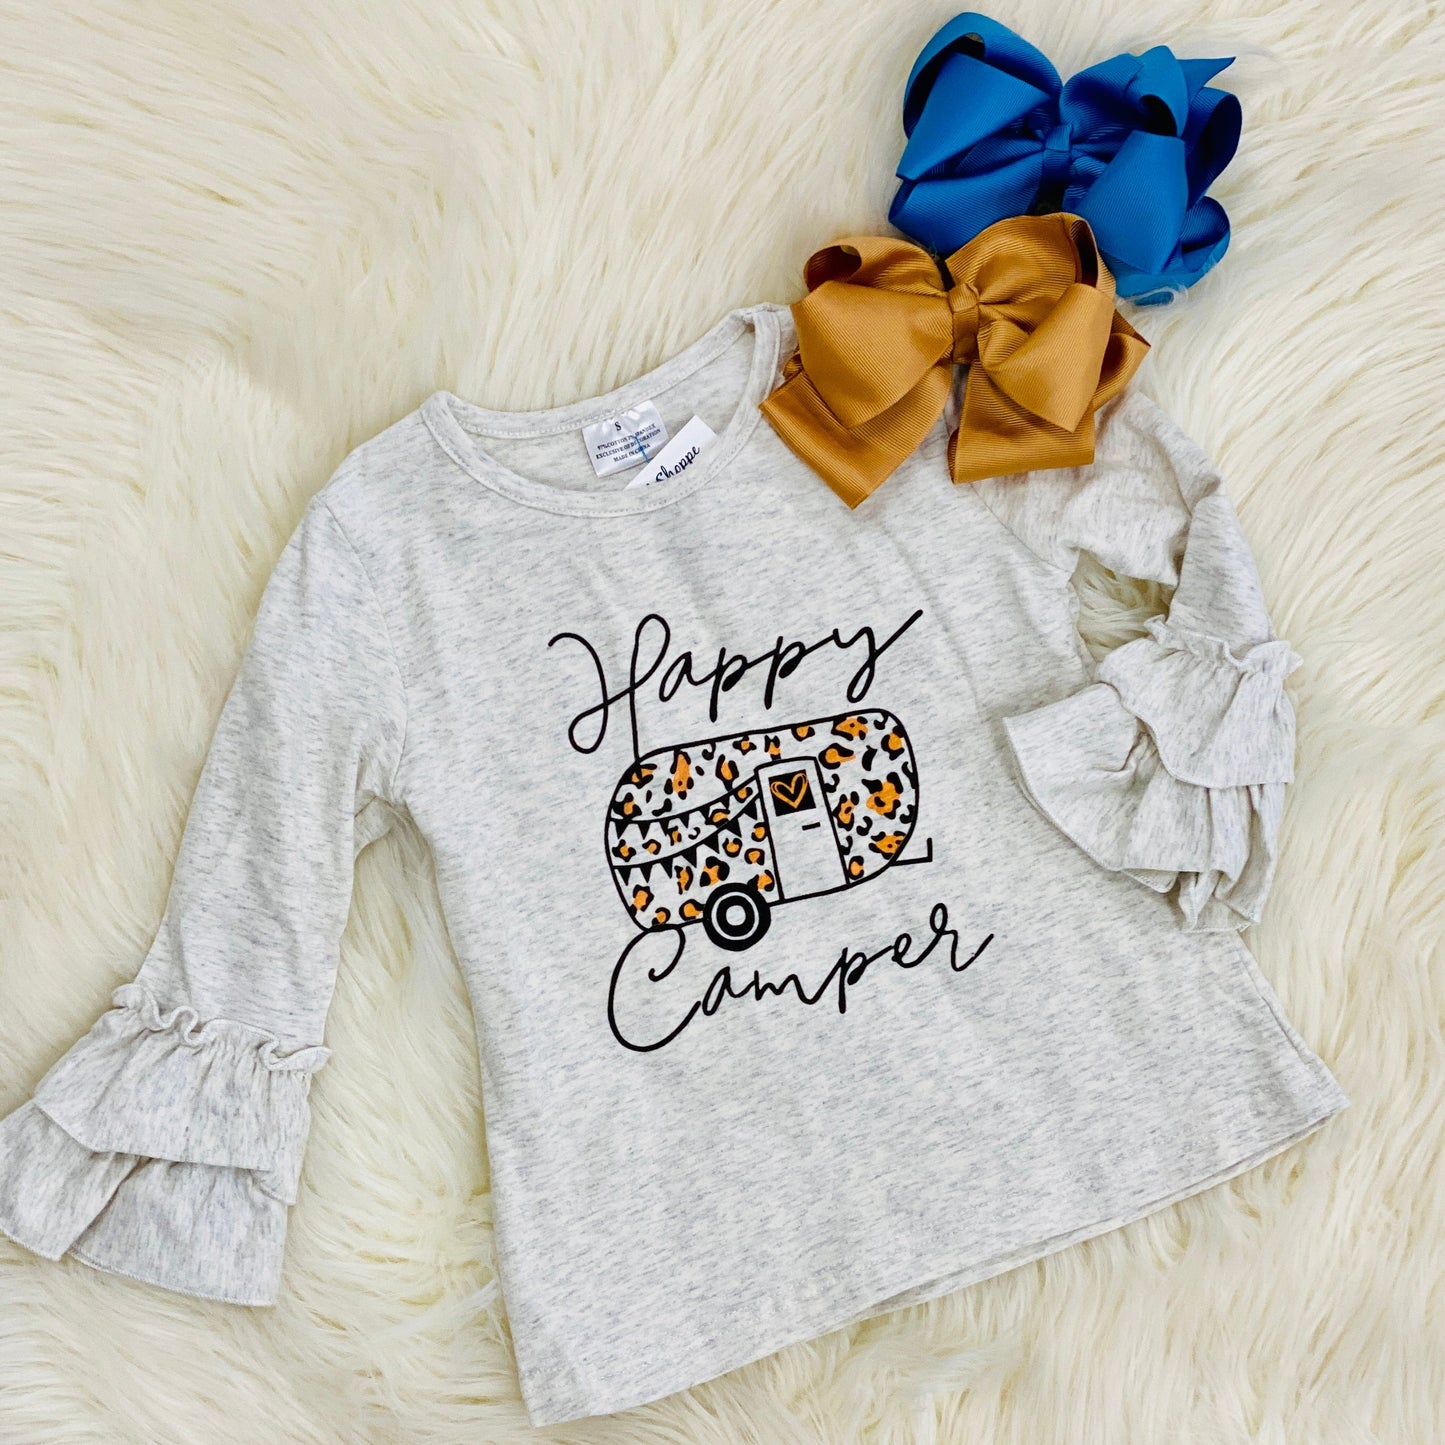 This heather gray fall graphic ruffle sleeve top features a vibrant leopard camper design and flared ruffle sleeves. We recommend pairing it with our leopard patch jeans.  In-store ready to ship or try on!